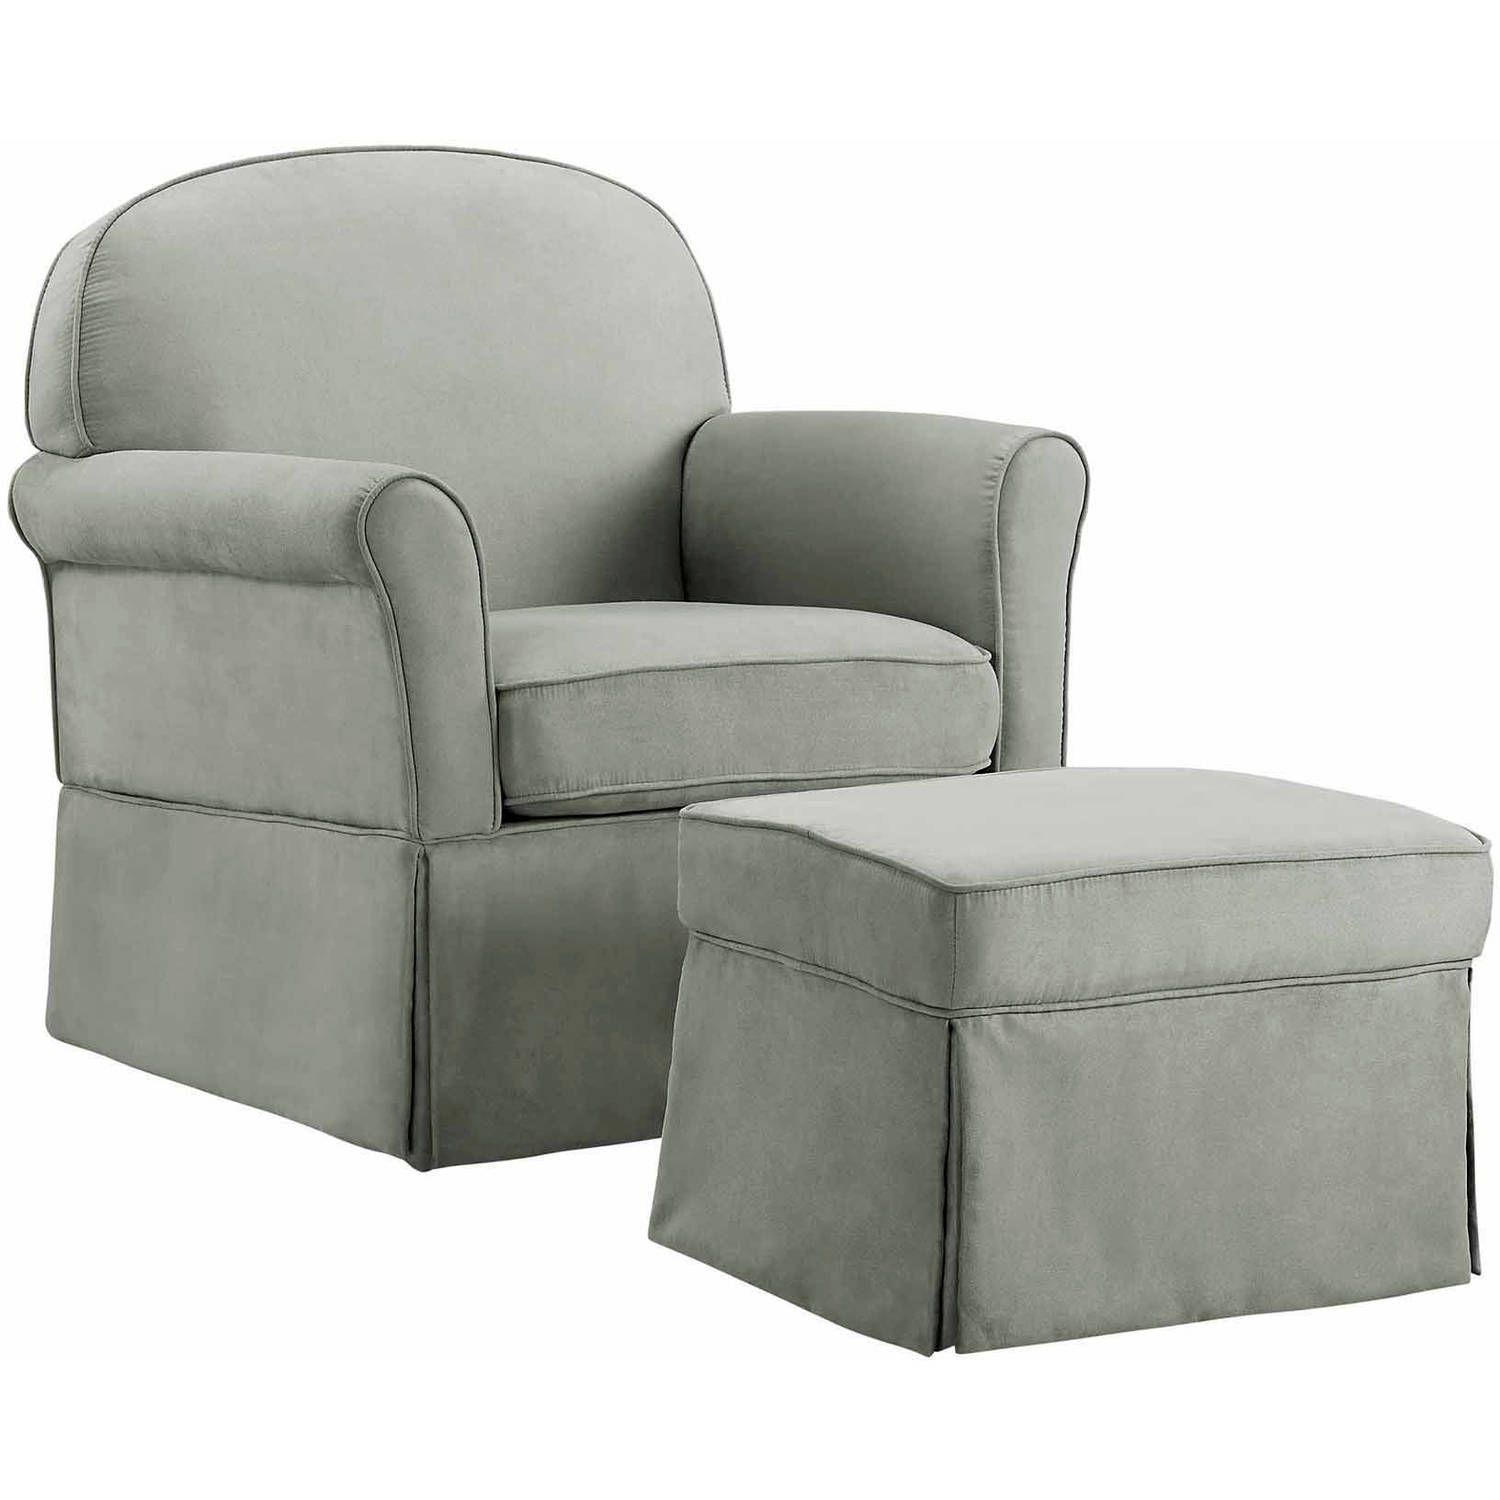 Baby Relax Evan Swivel Glider And Ottoman Gray – Walmart Within Gliders With Ottoman (View 3 of 15)